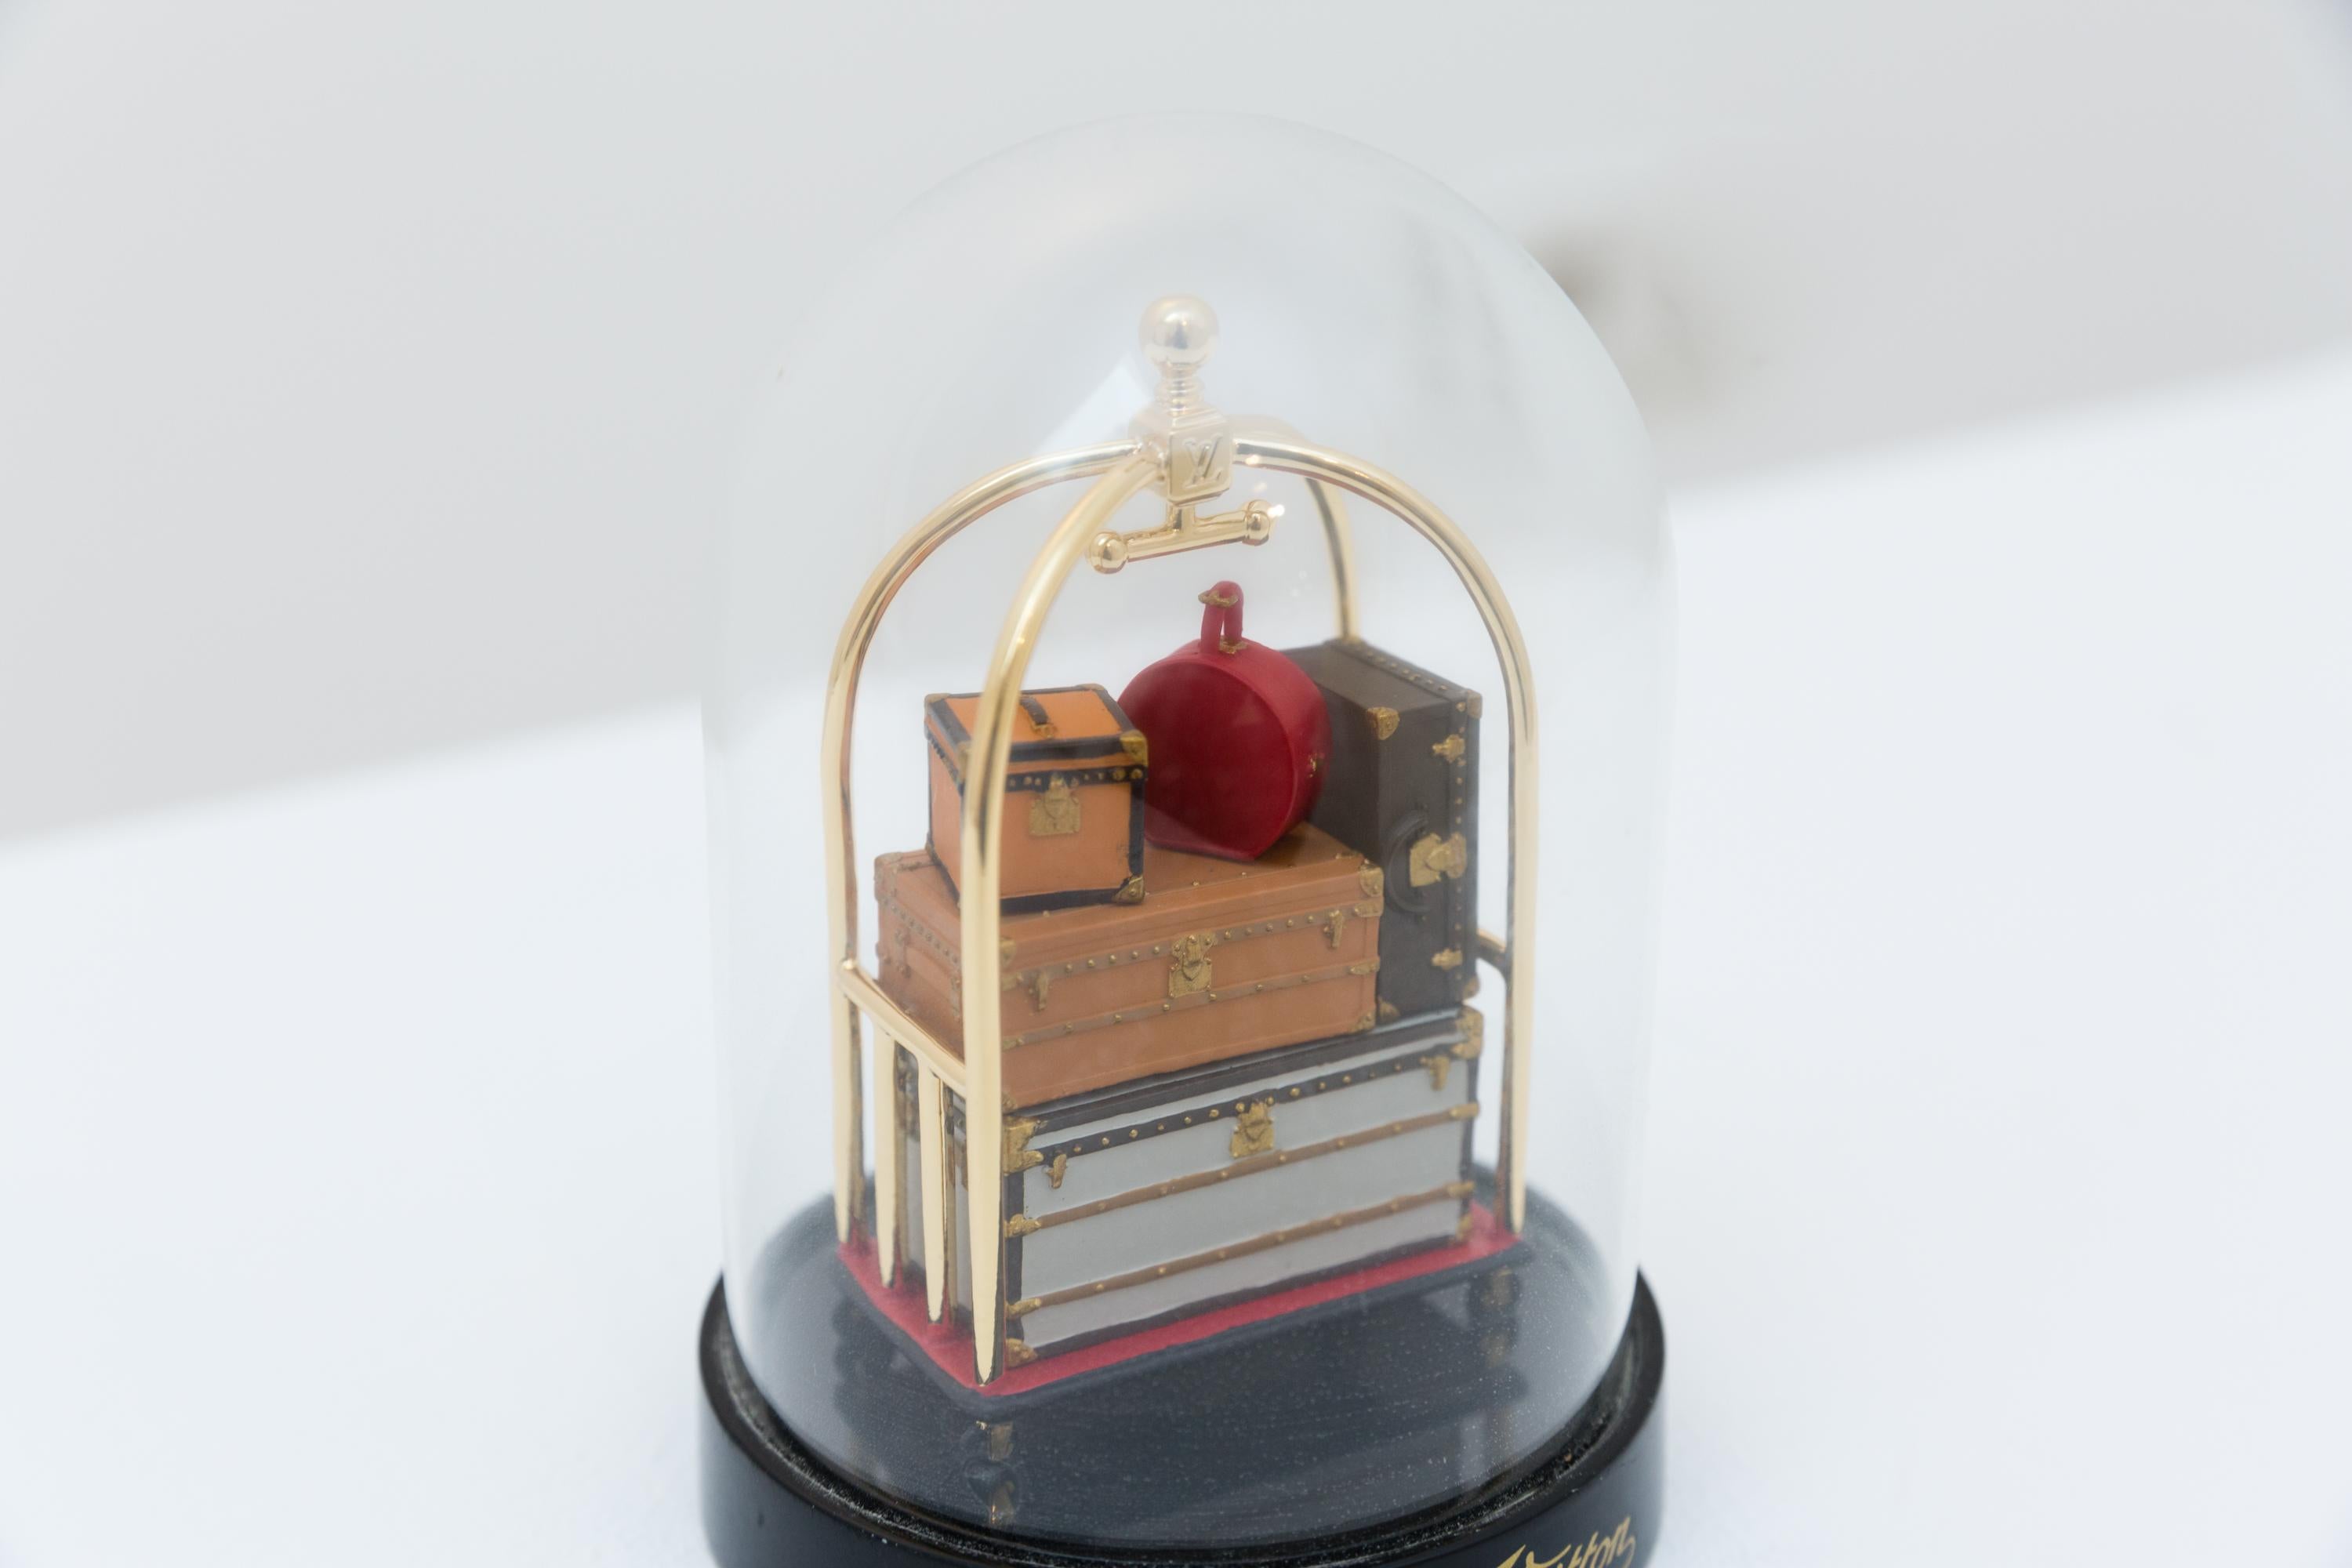 A Louis Vuitton desk paperweight showing a suitcase venture holding LV luggage inside.
The rare paperweights by Louis Vuitton are VIP gifts, made for special clients only and were not made for retail.